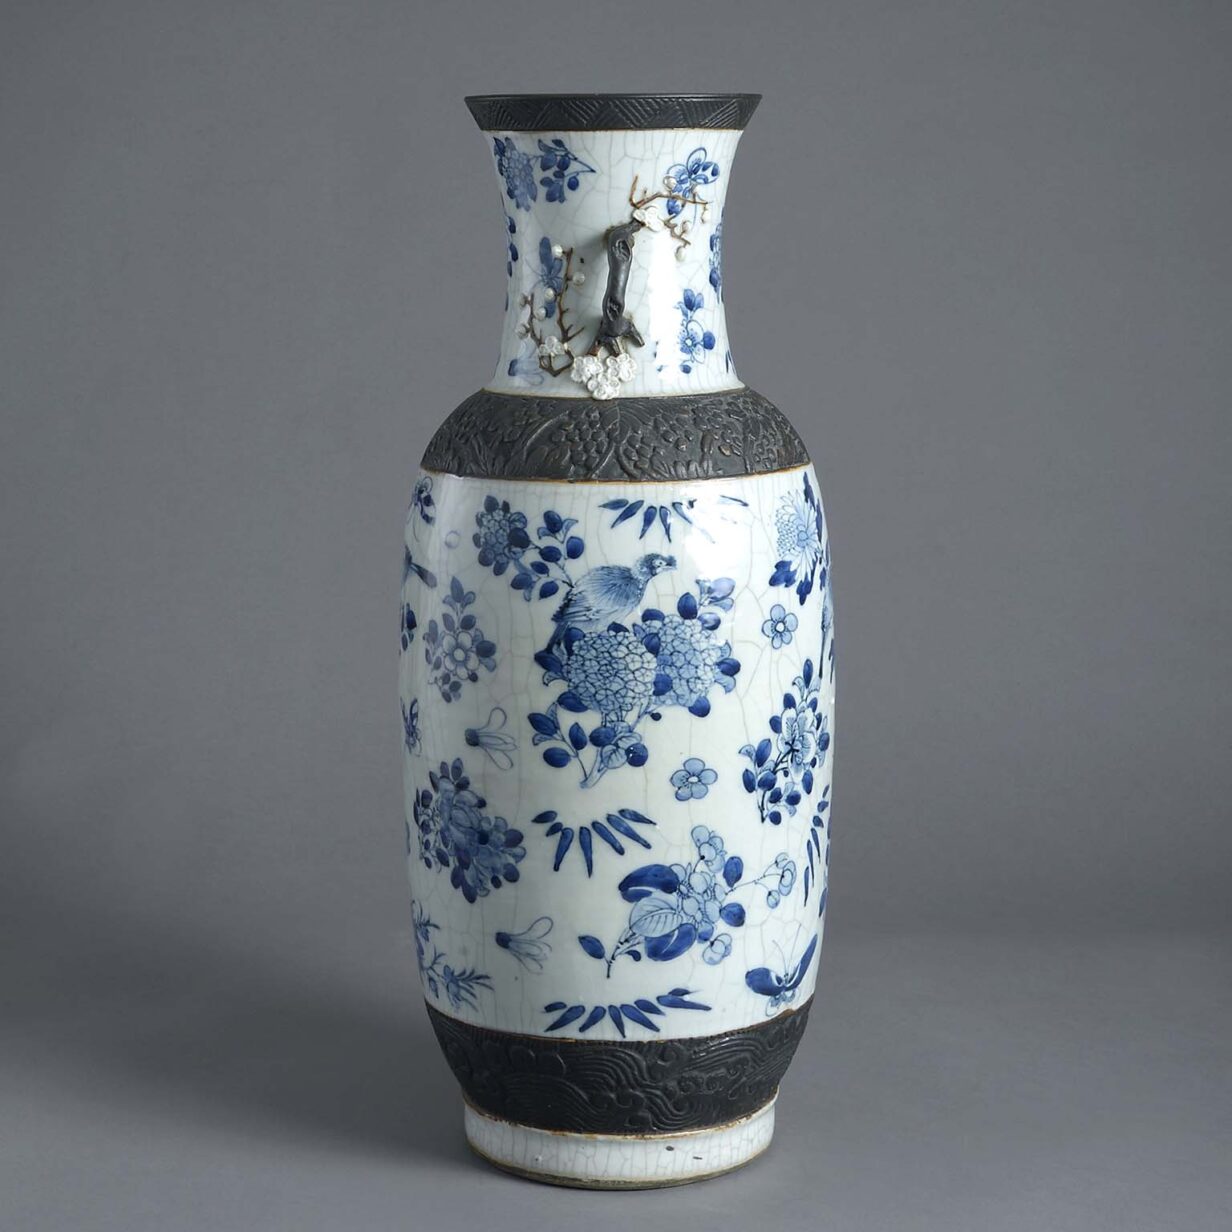 Tall 19th century blue and white crackle glazed vase